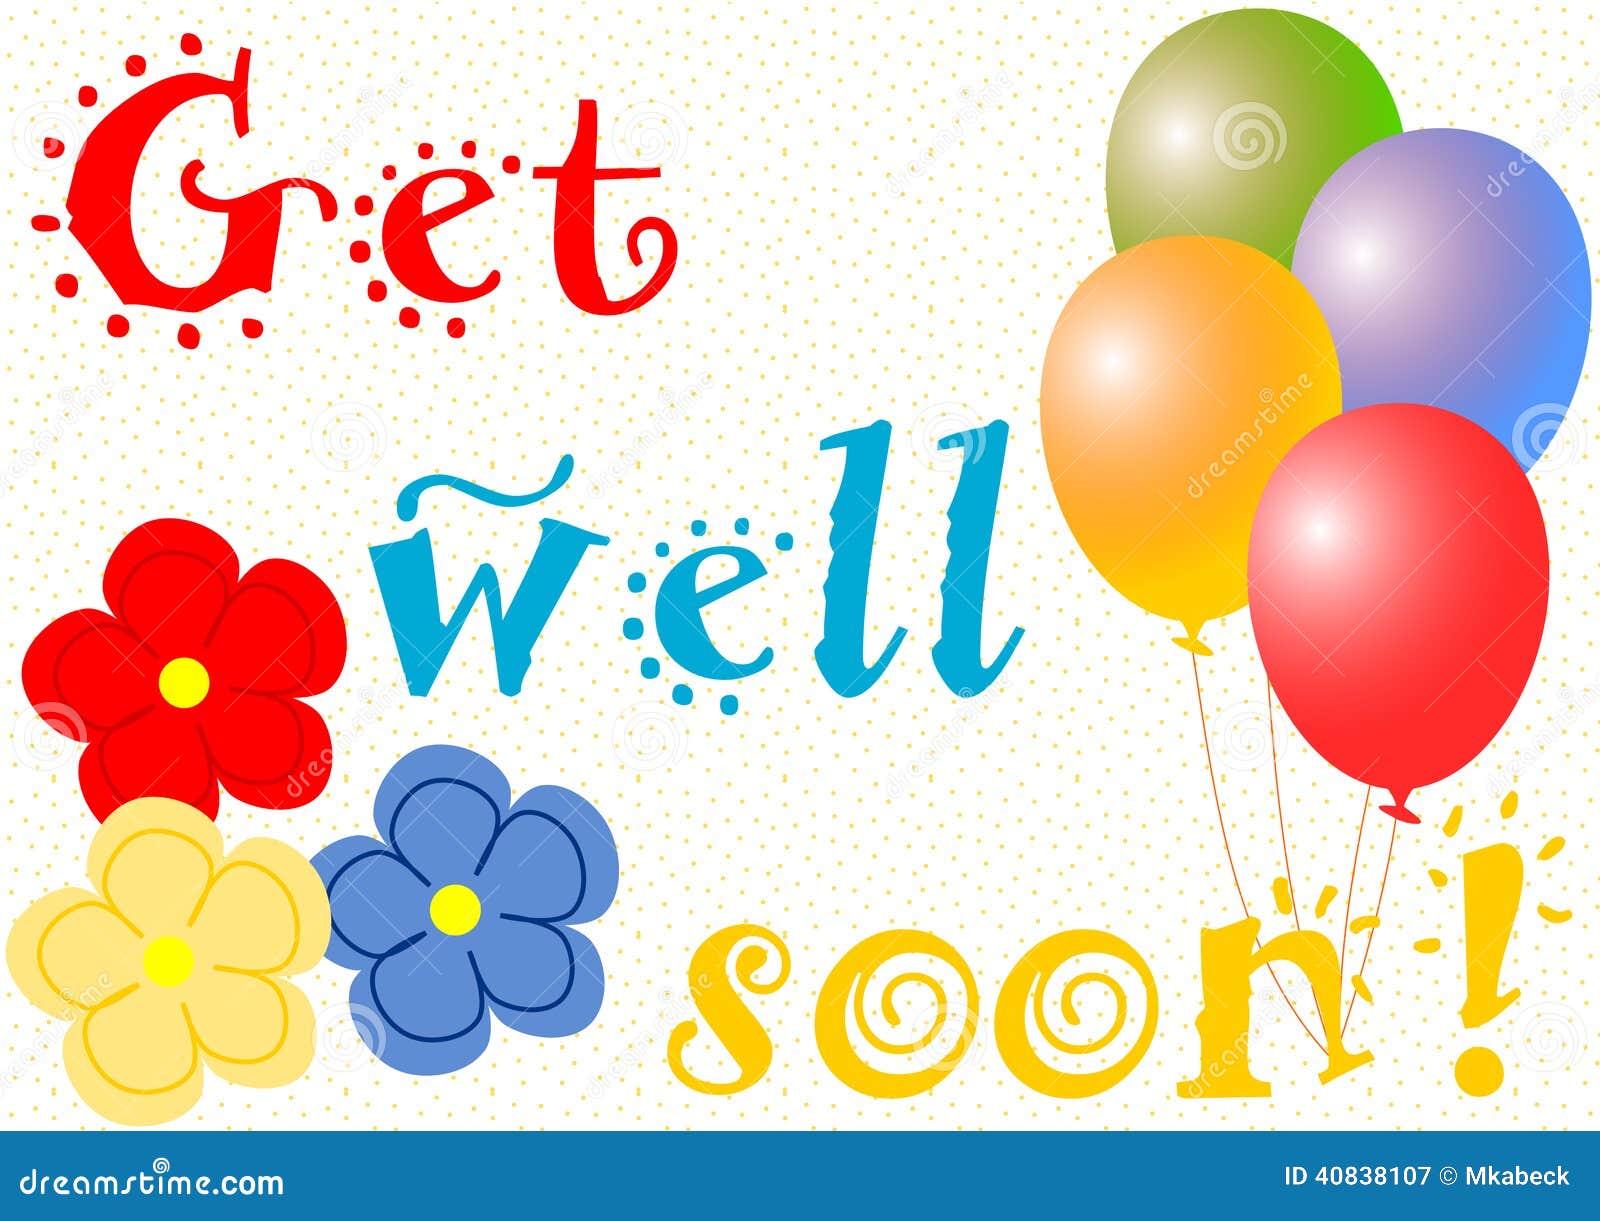 get well soon clipart - photo #18